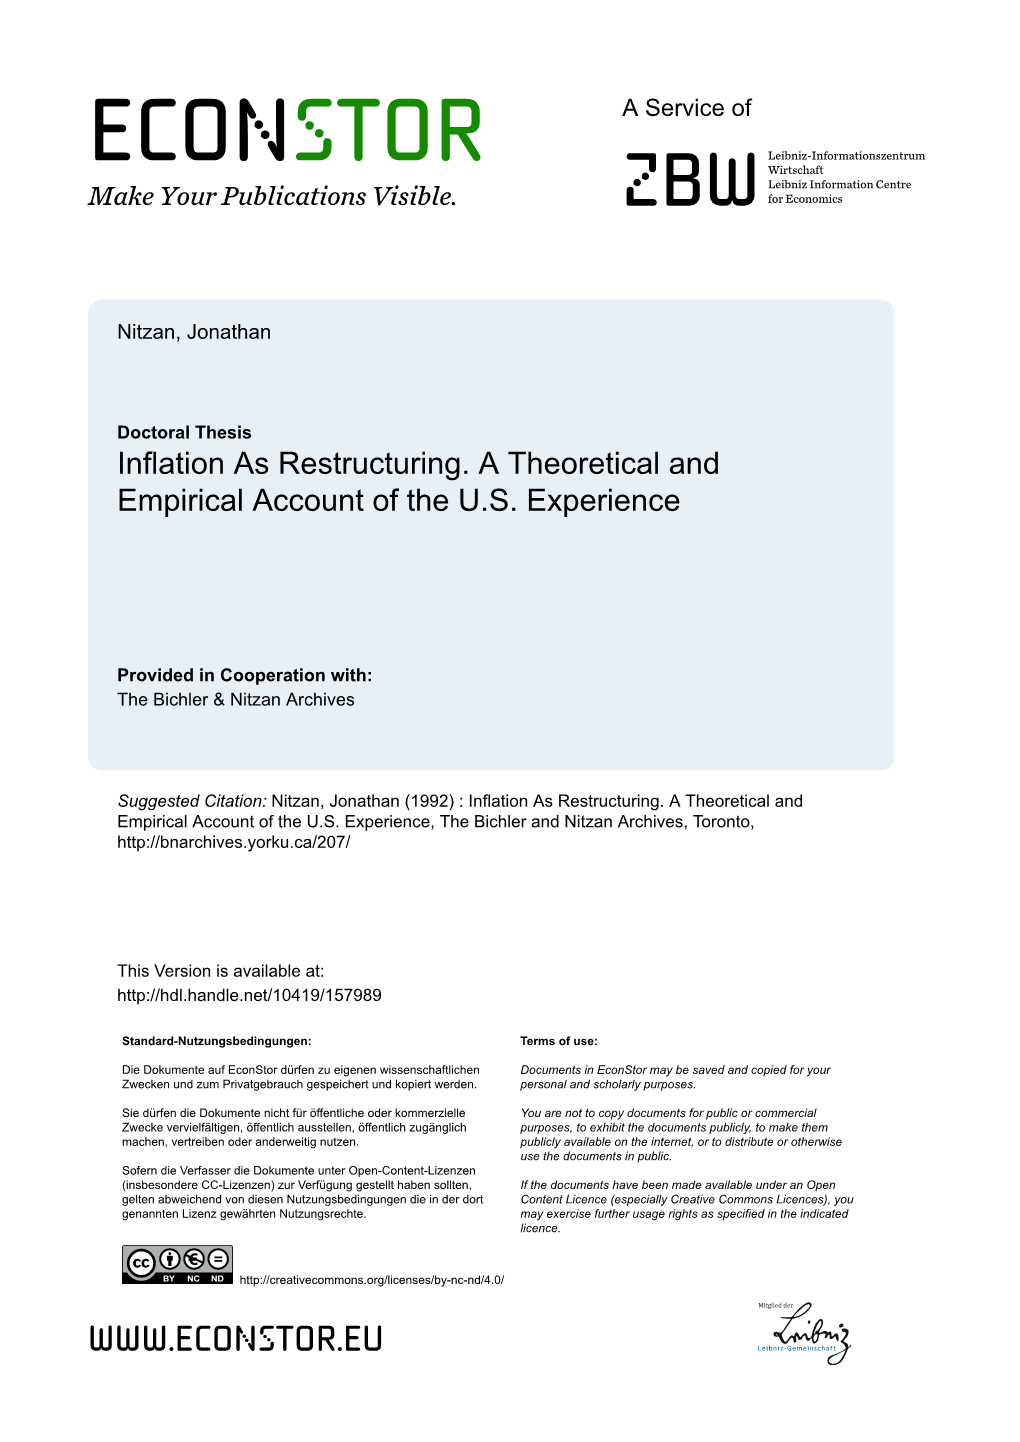 Inflation As Restructuring. a Theoretical and Empirical Account of the U.S